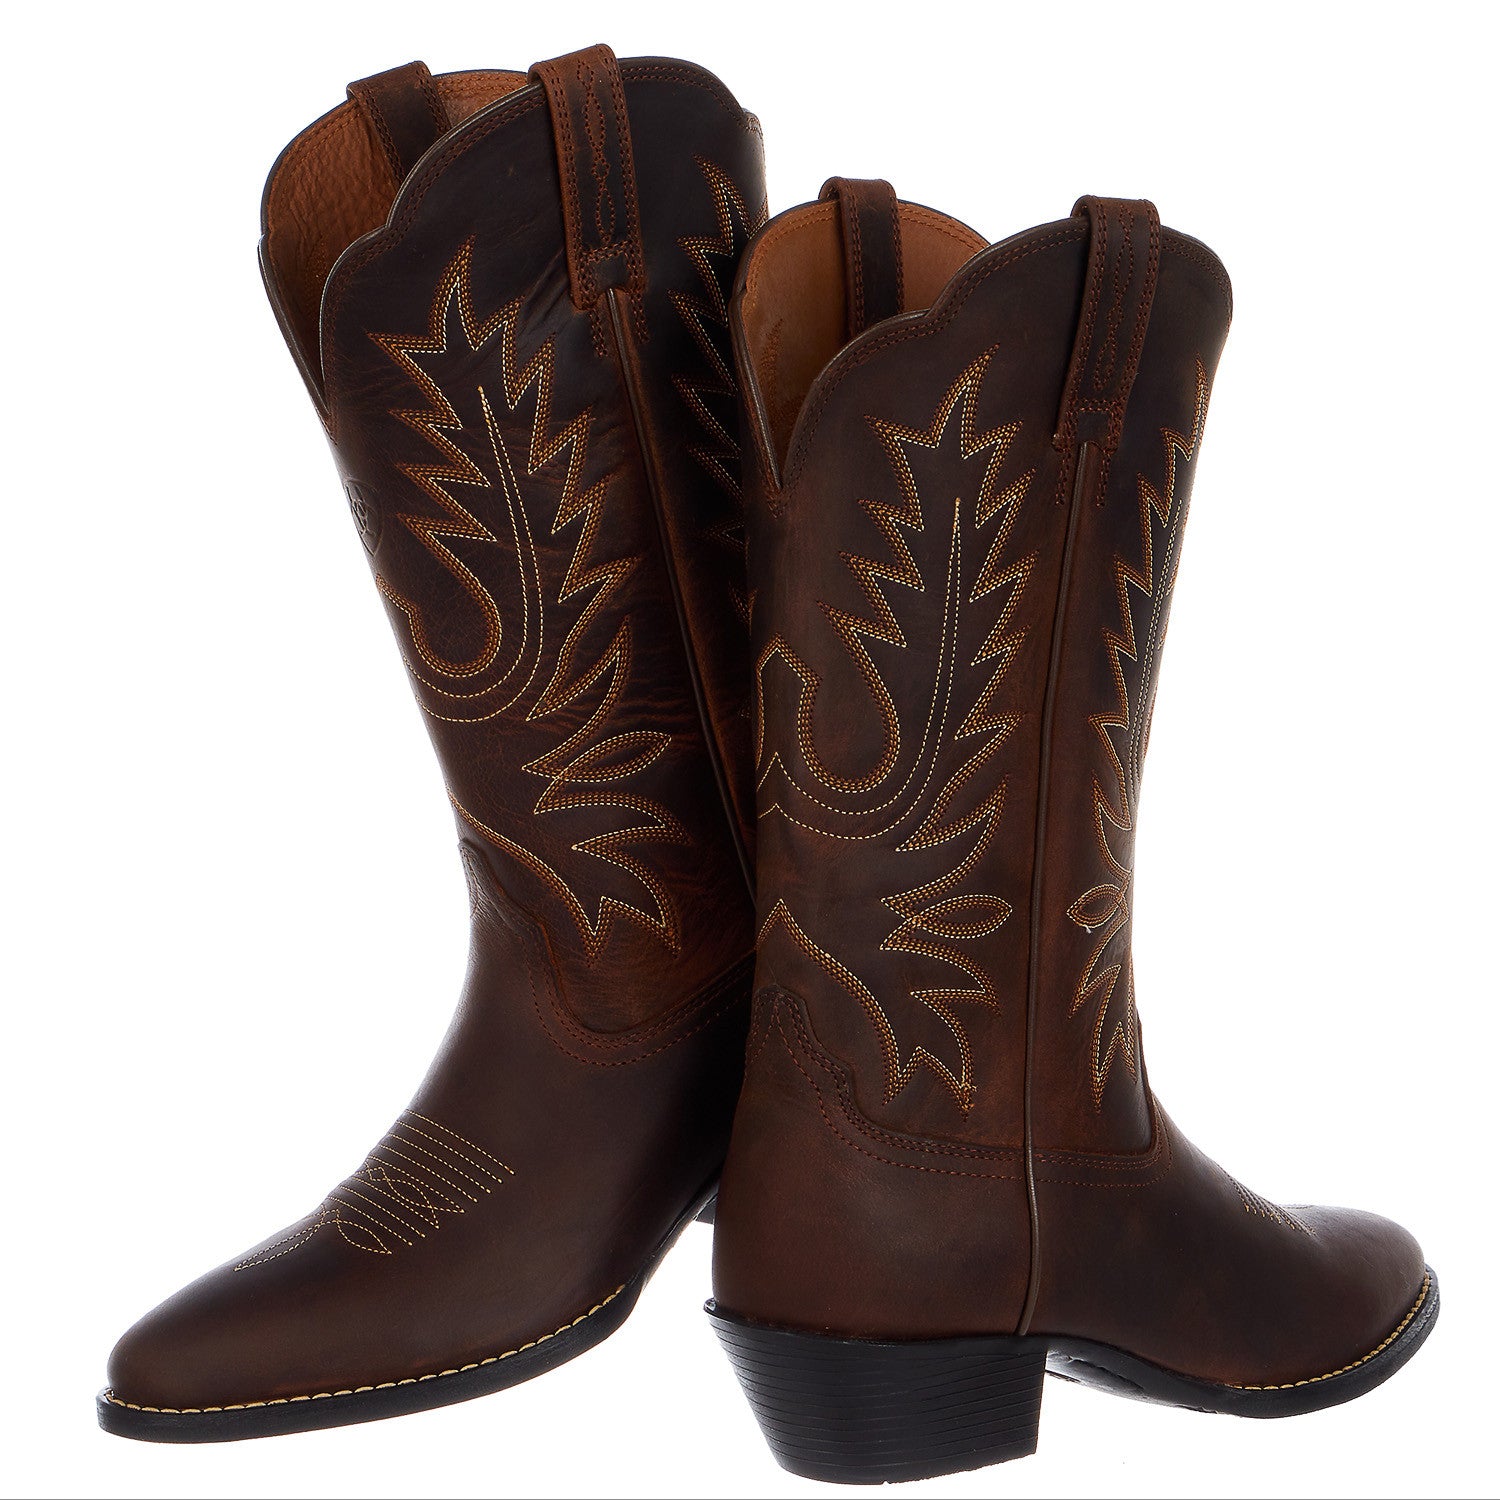 Ariat Heritage Roper Boots - Distressed Brown